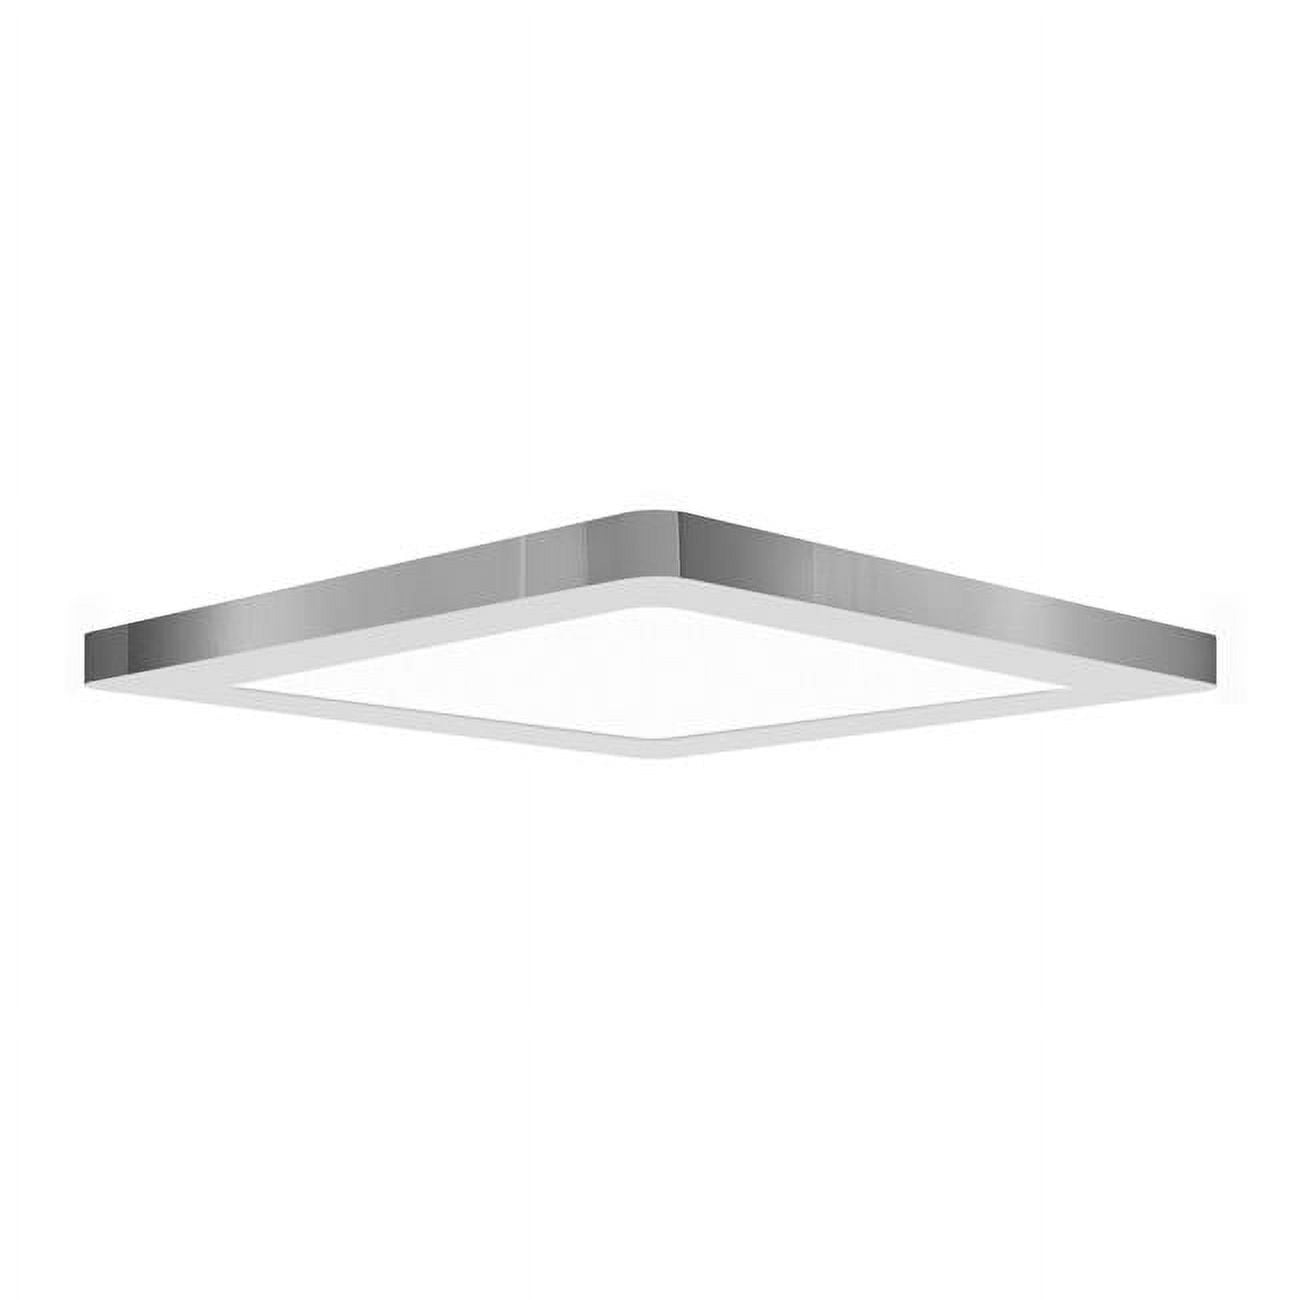 Picture of Access Lighting 20834TRIM-CH 12 in. ModPLUS Chrome Trim Recessed for 20834 & 20840